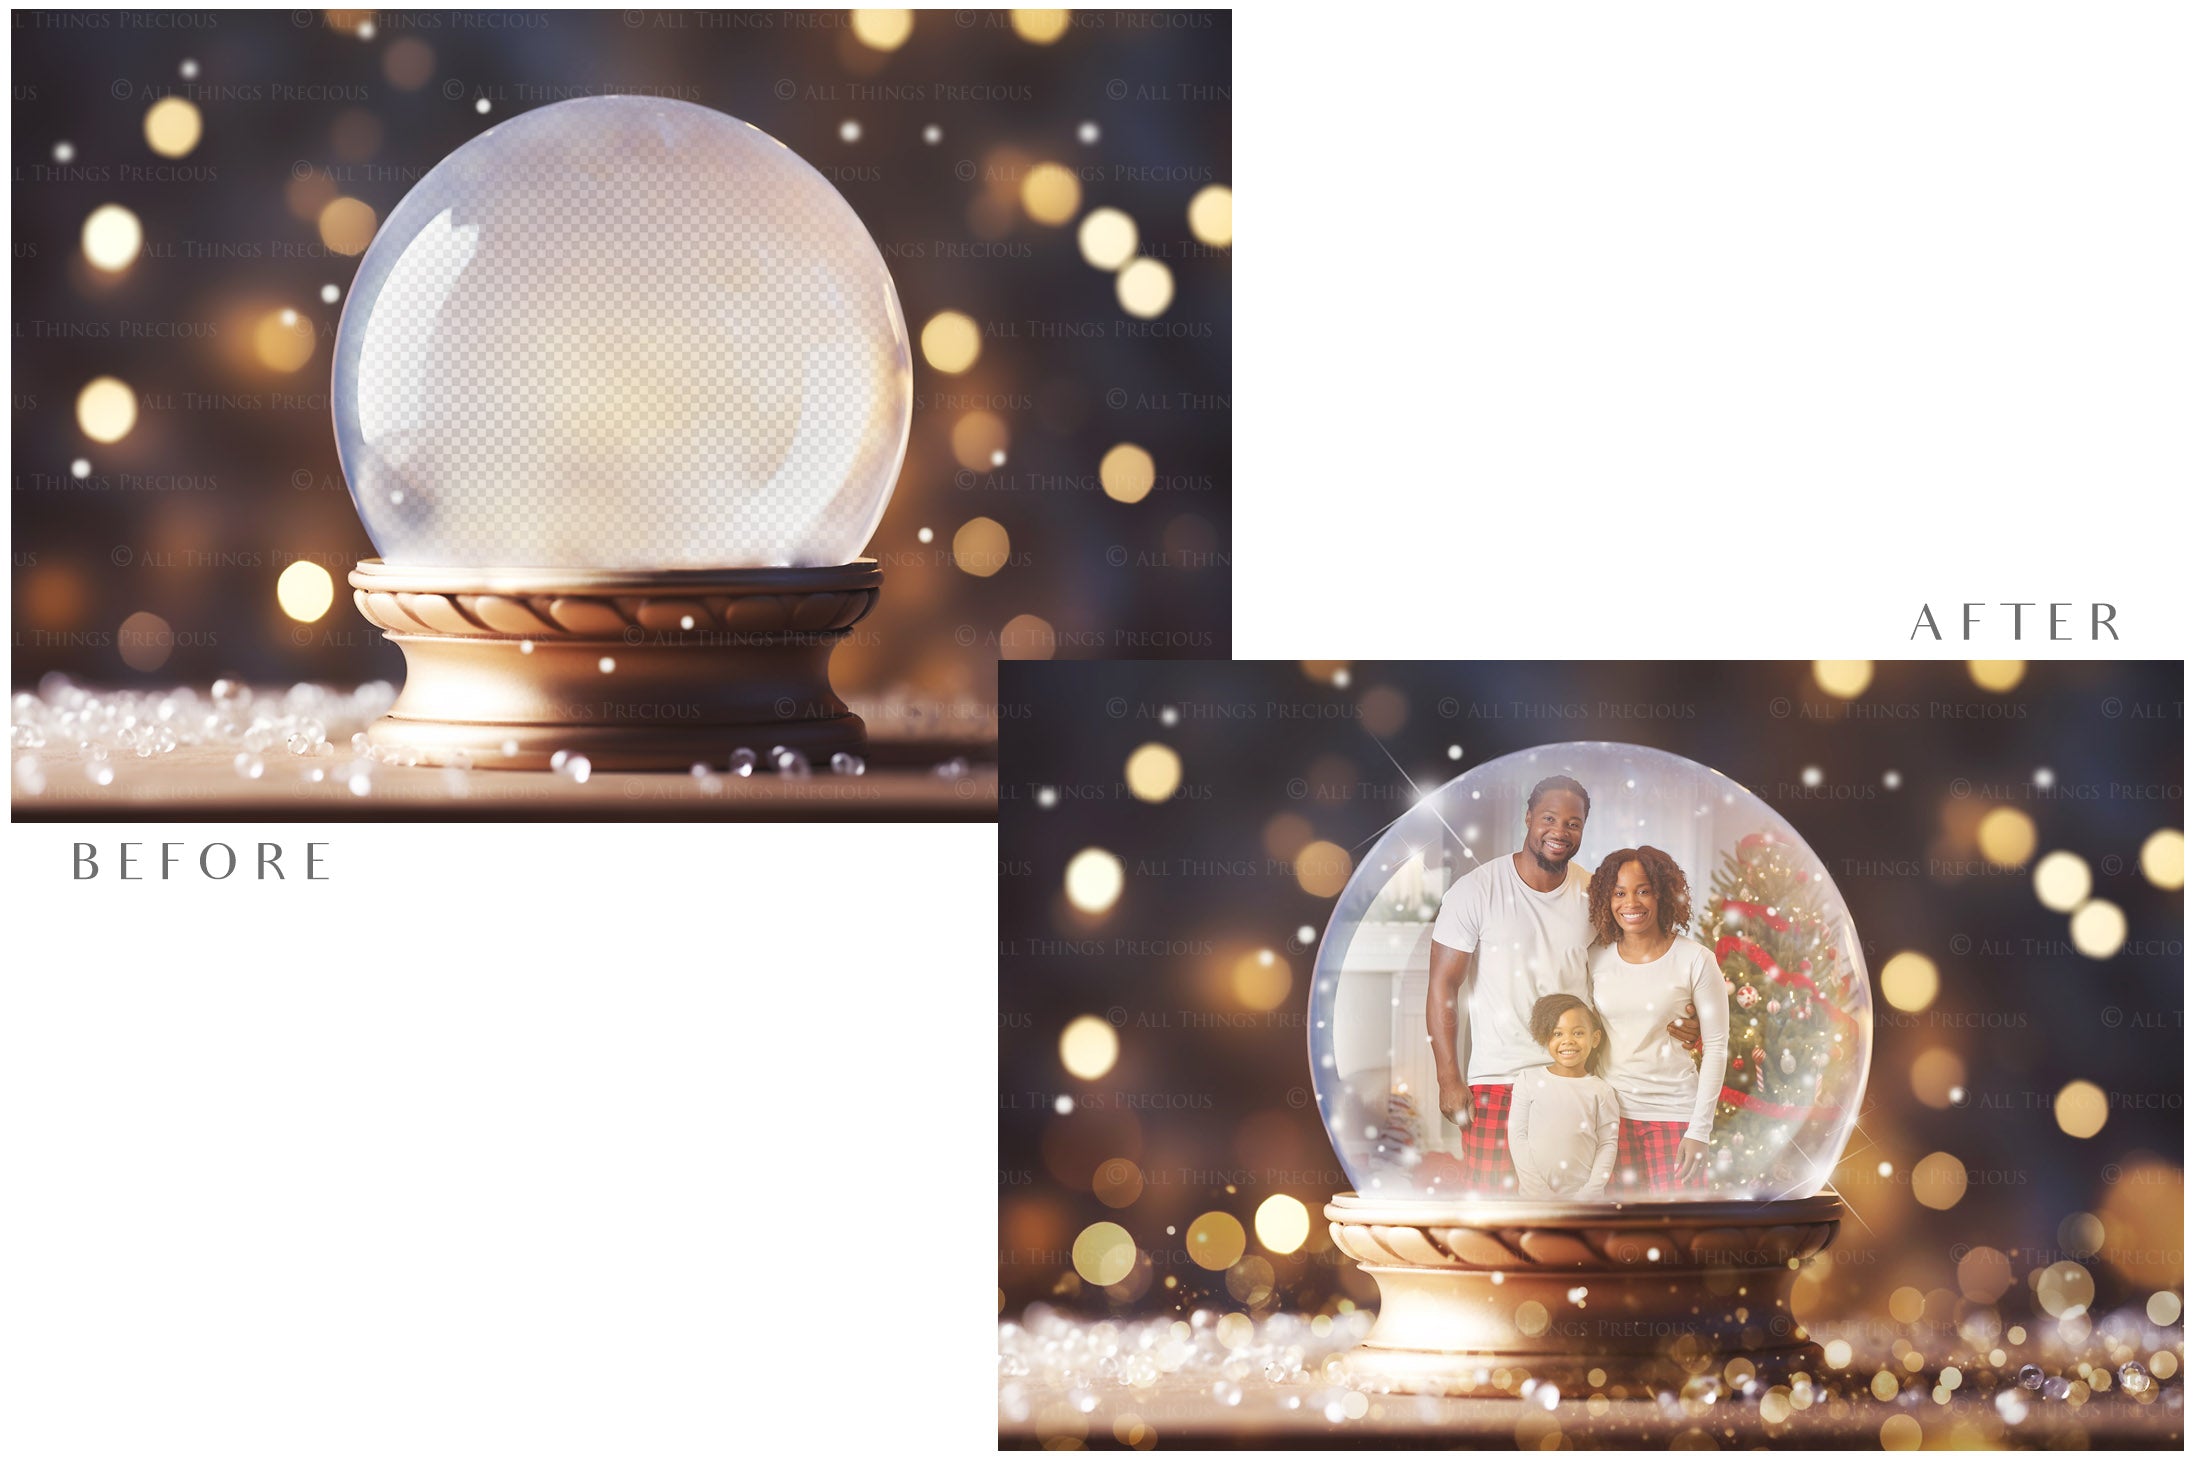 Digital Snow Globe Background, with Png snow overlays & PSD Template. The globe is transparent, perfect for adding your own images and retain the glass effect.The file is 6000 x 4000, 300dpi. Png Included. Use for Christmas edits, Photography, Card Crafts, Scrapbooking. Xmas Backdrops. Santa holding a glass ball.